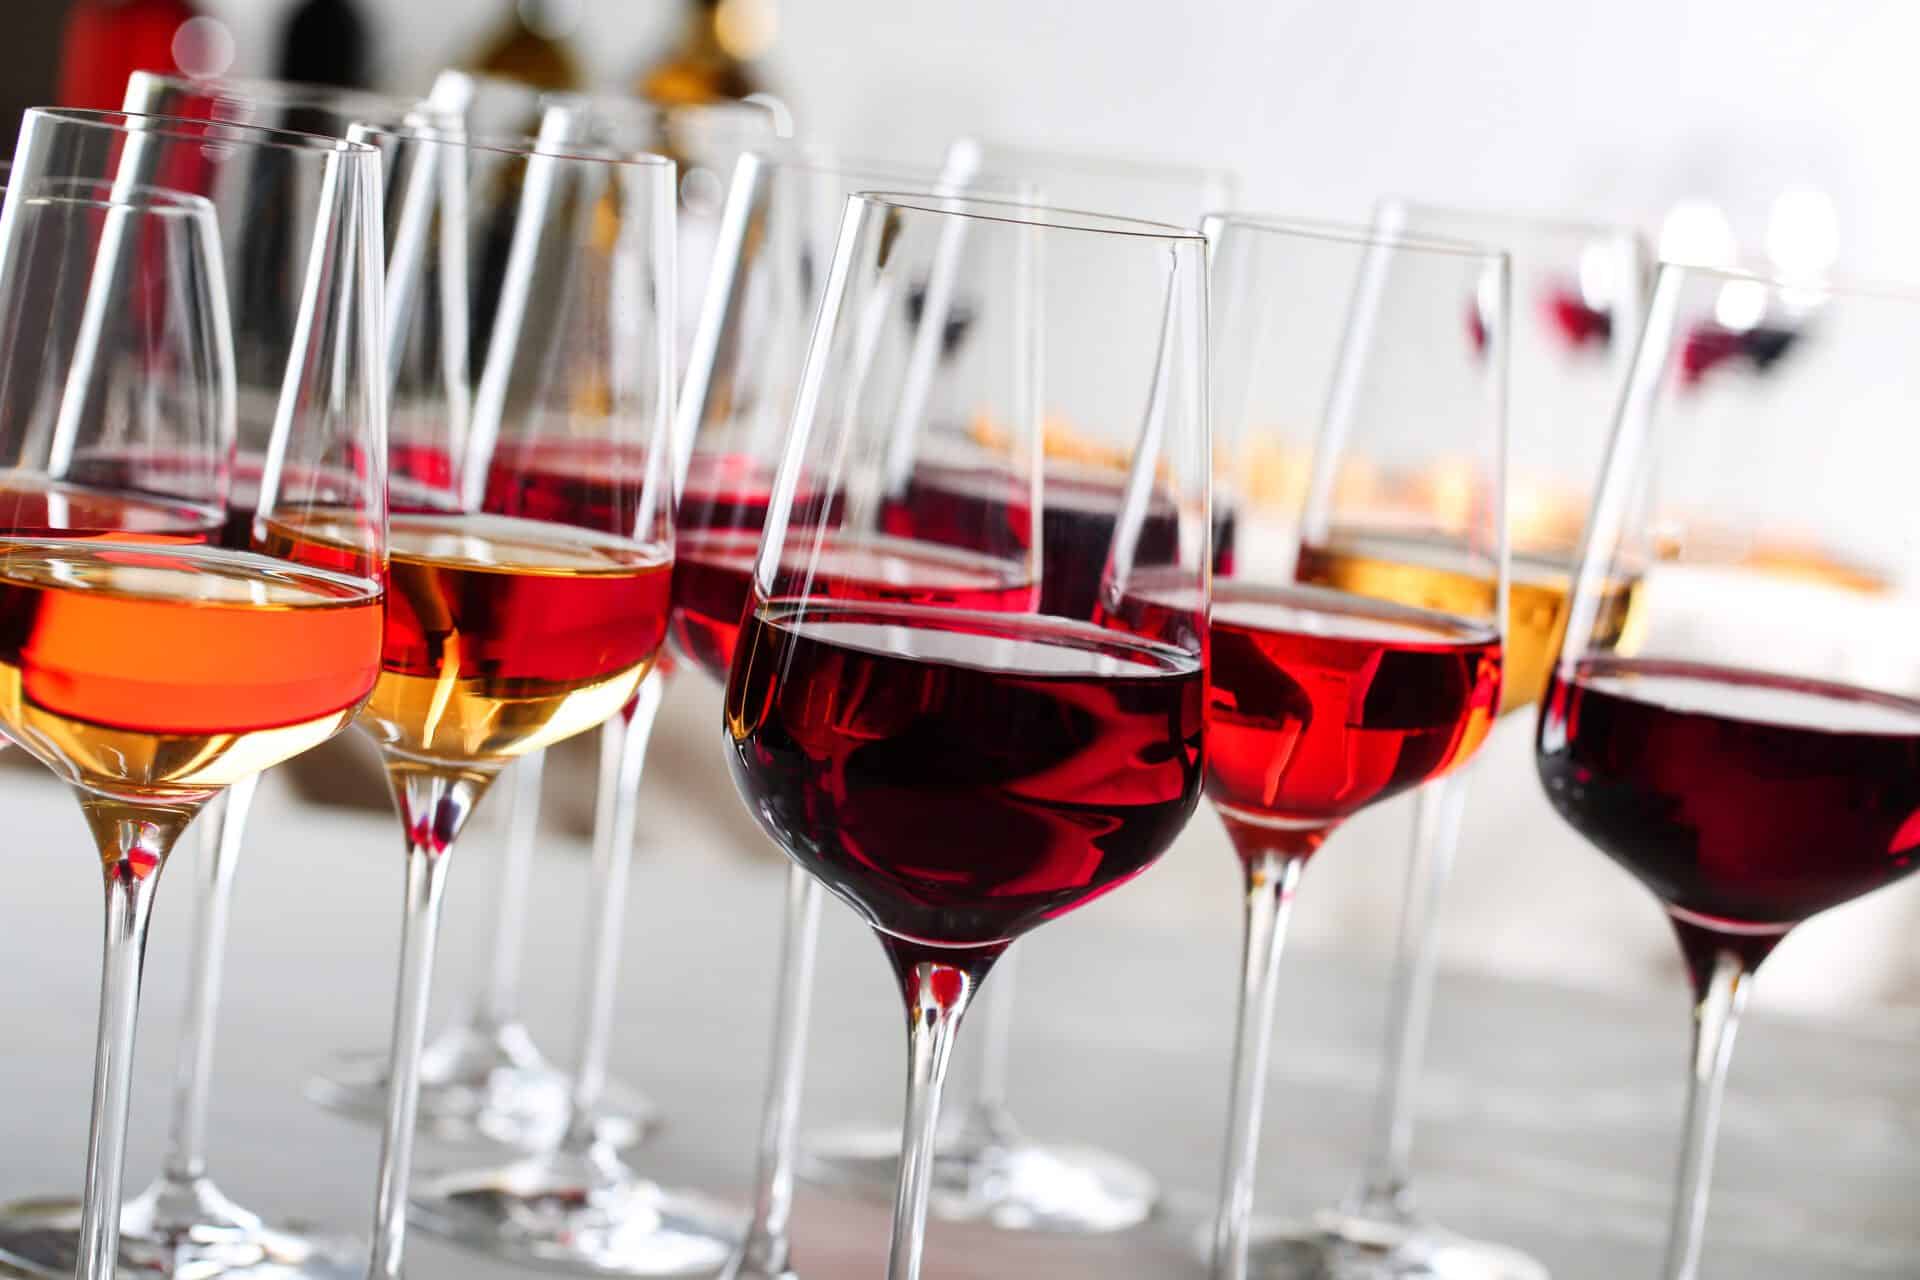 Glasses,With,Different,Wines,On,Blurred,Background,,Closeup